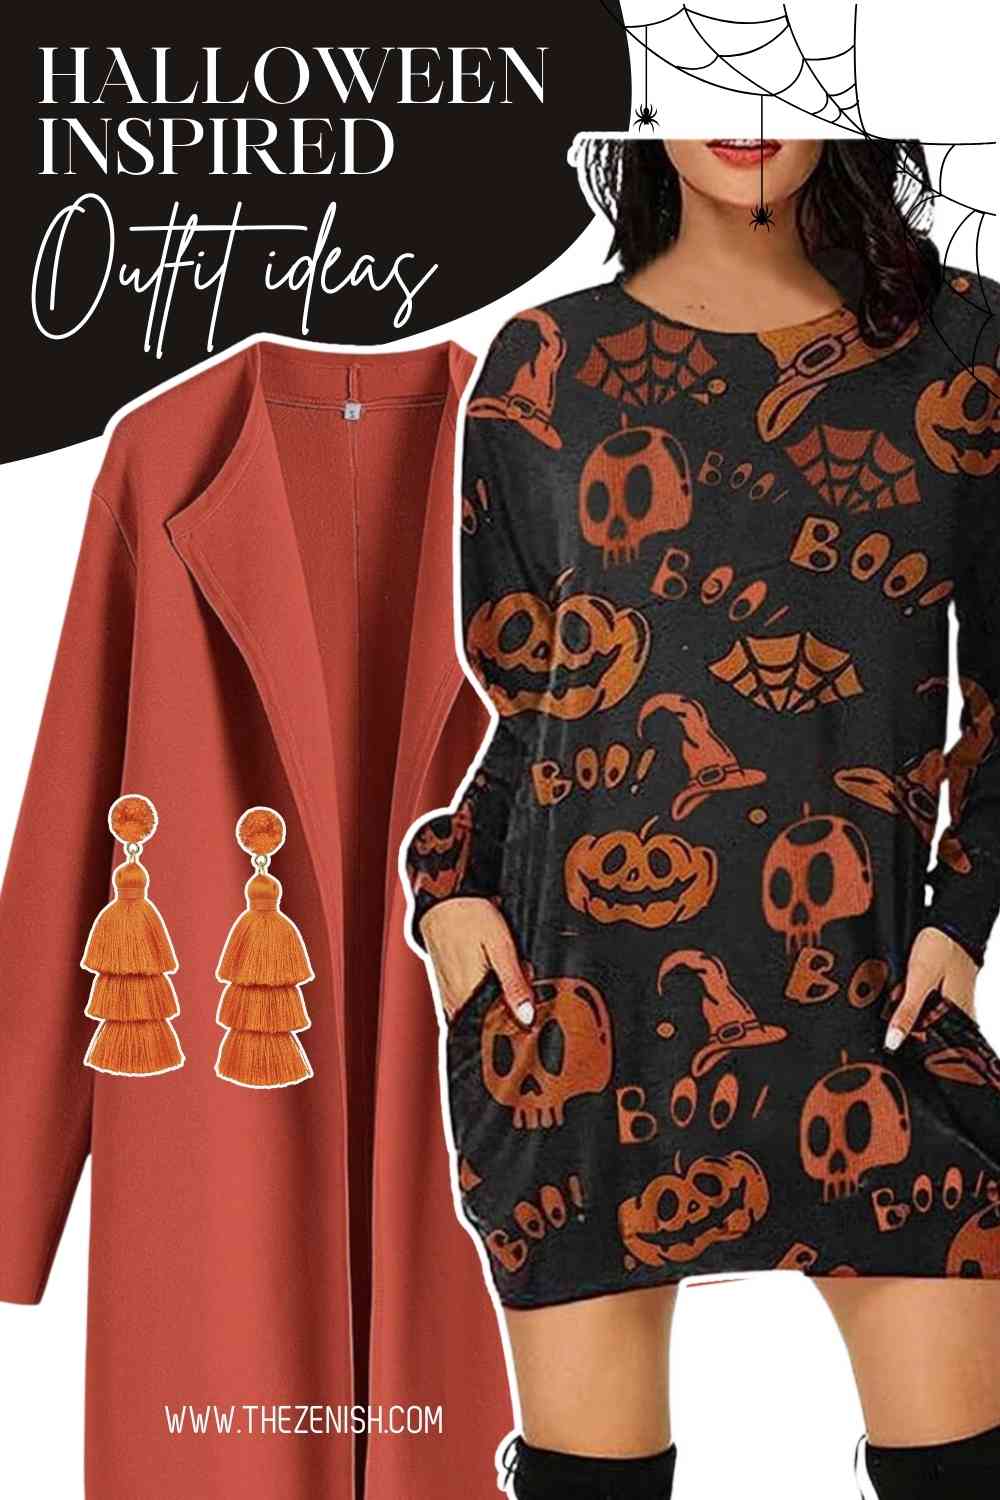 13 Spooktacular Halloween Inspired Outfit Ideas 3 13 Spooktacular Halloween Inspired Outfit Ideas